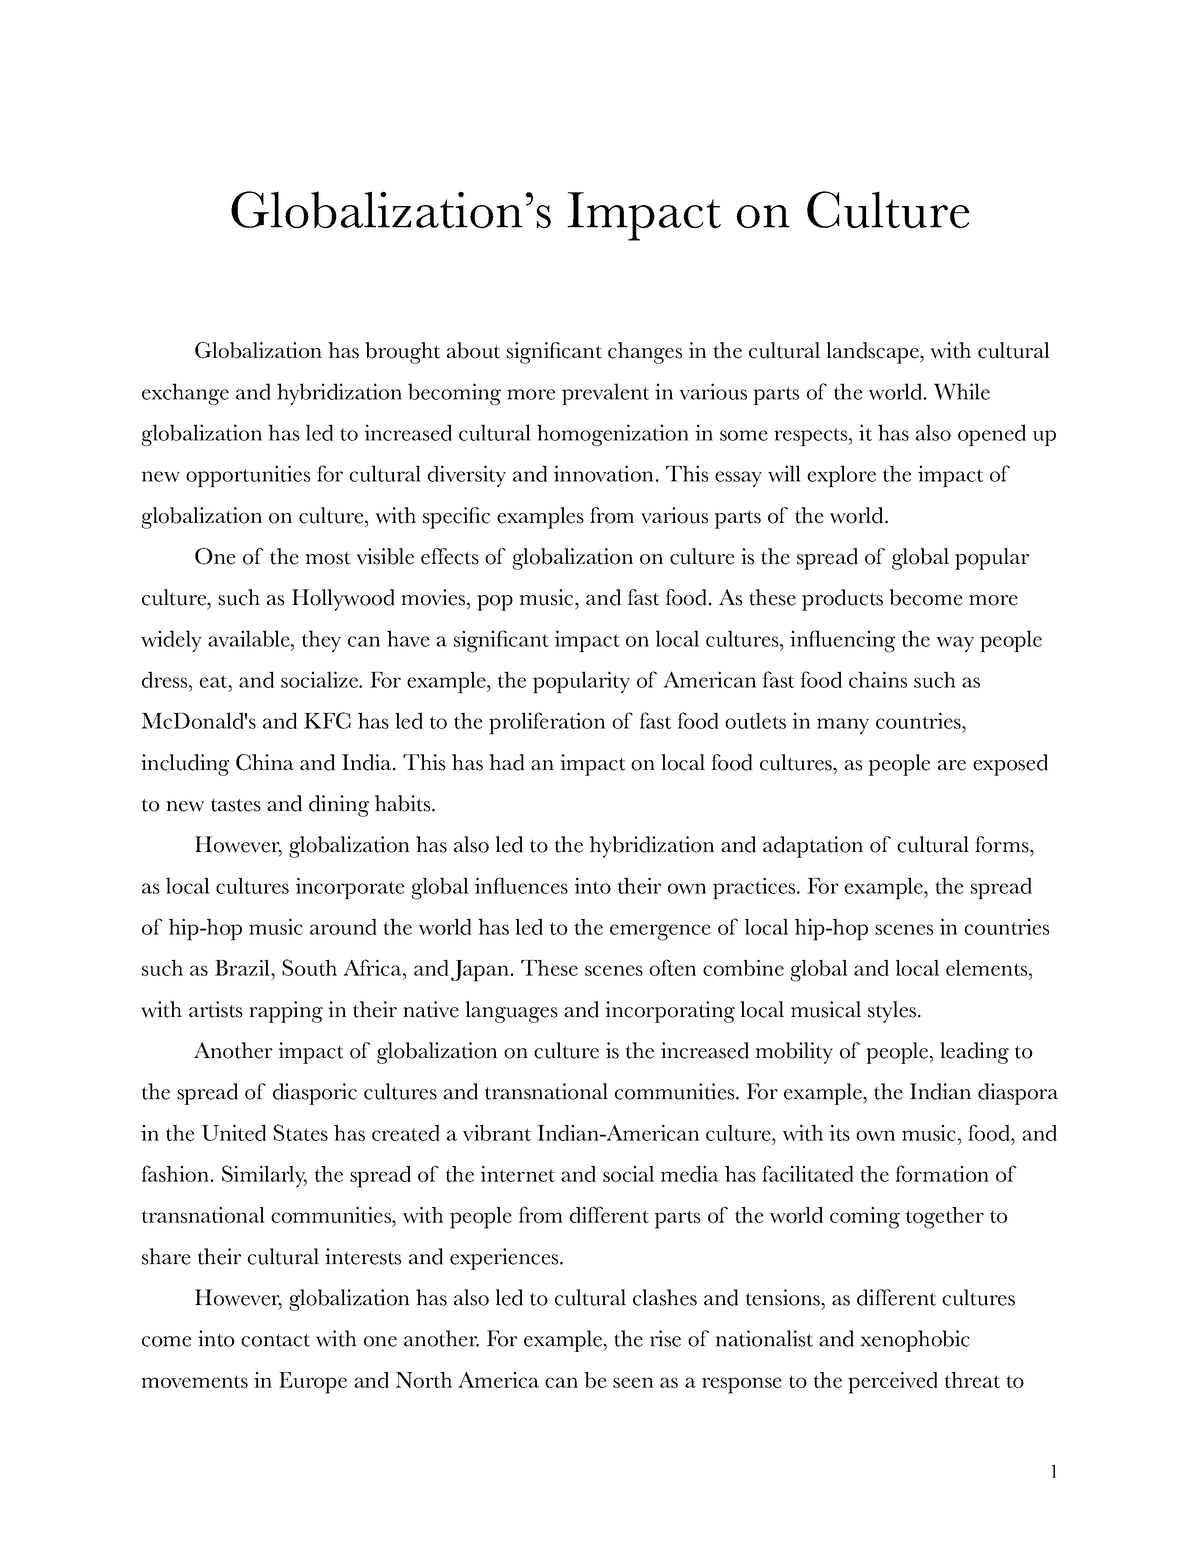 globalization impact on culture essay